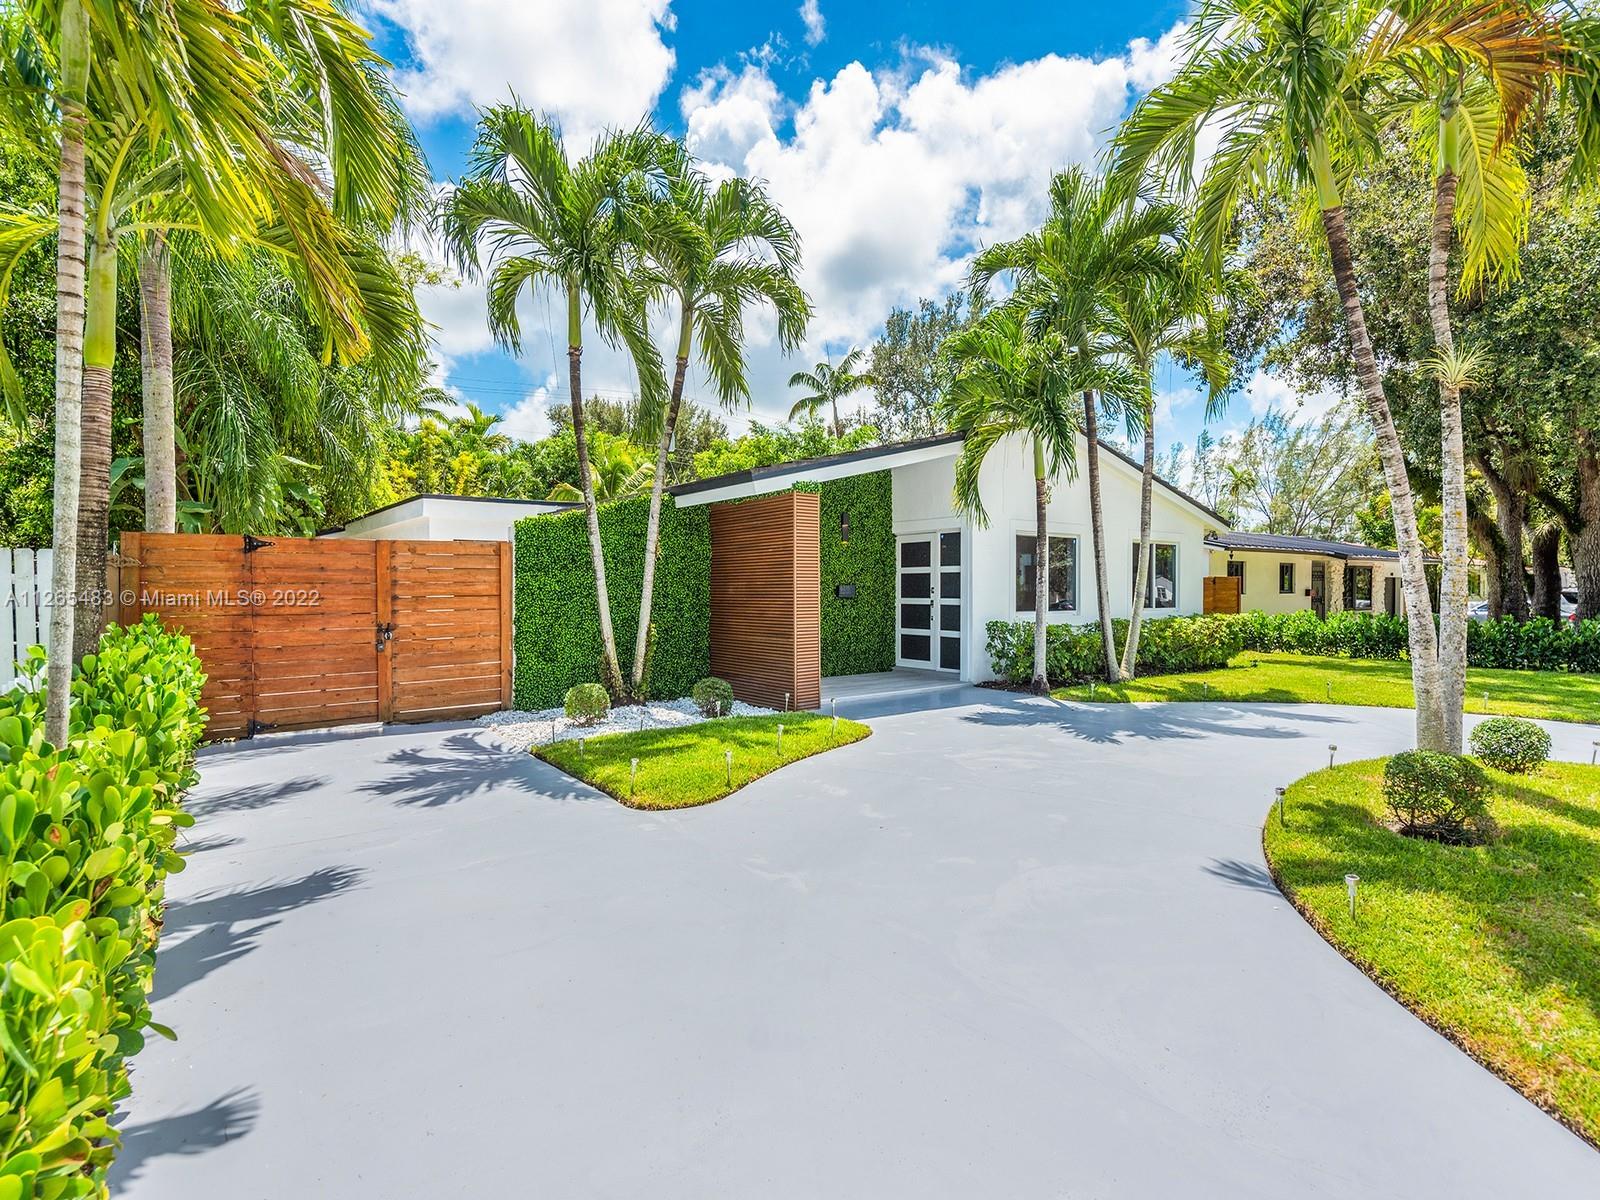 Located in a prime location of South Miami, this gorgeously renovated home features 4 beds, 4 baths and an airy, light filled grand entertaining area with modern kitchen complete with custom cabinetry, quartz counters and stainless appliances. The master suite and ensuite bedrooms boast beautiful finishes and walk-in closets with custom cabinetry. Outside, the covered patio offers a large seating area, custom decor planting wall and ceilings with an adjacent sun soaked patio. The backyard has a large recreation lawn perfect for a future pool and/or playground. A dedicated laundry room w/ exterior access, wide format porcelain flooring throughout, styled LED lighting and architecturally thoughtful design touches highlight this exquisite property. Walk/Bike to nearby downtown South Miami.